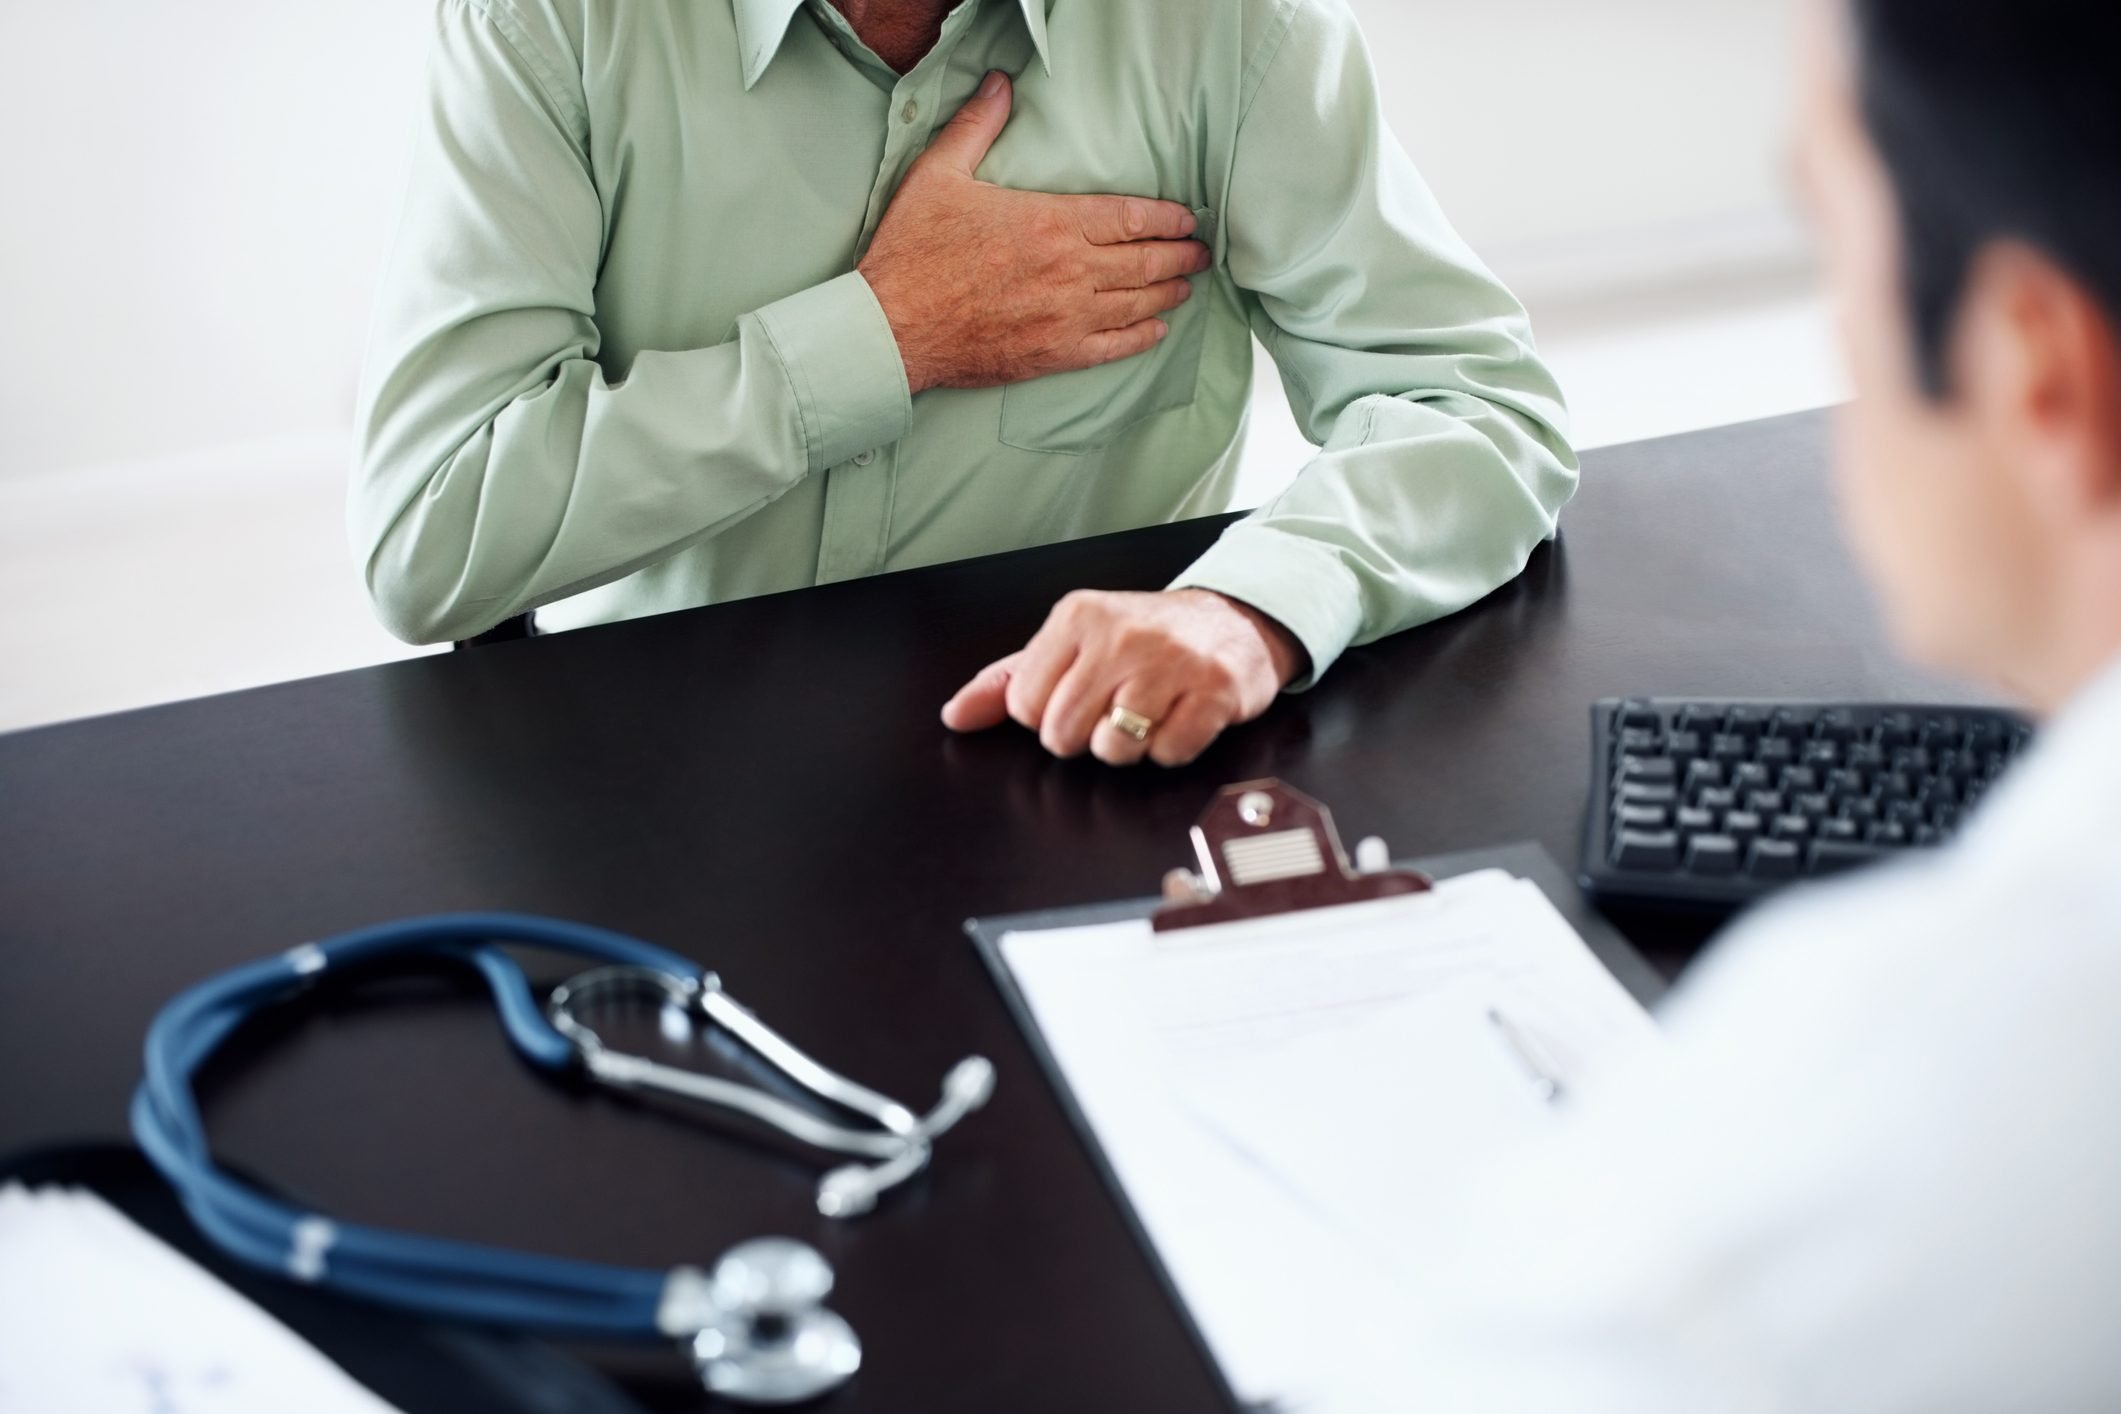 6 Types of Heart Disease Doctors Need You to Know